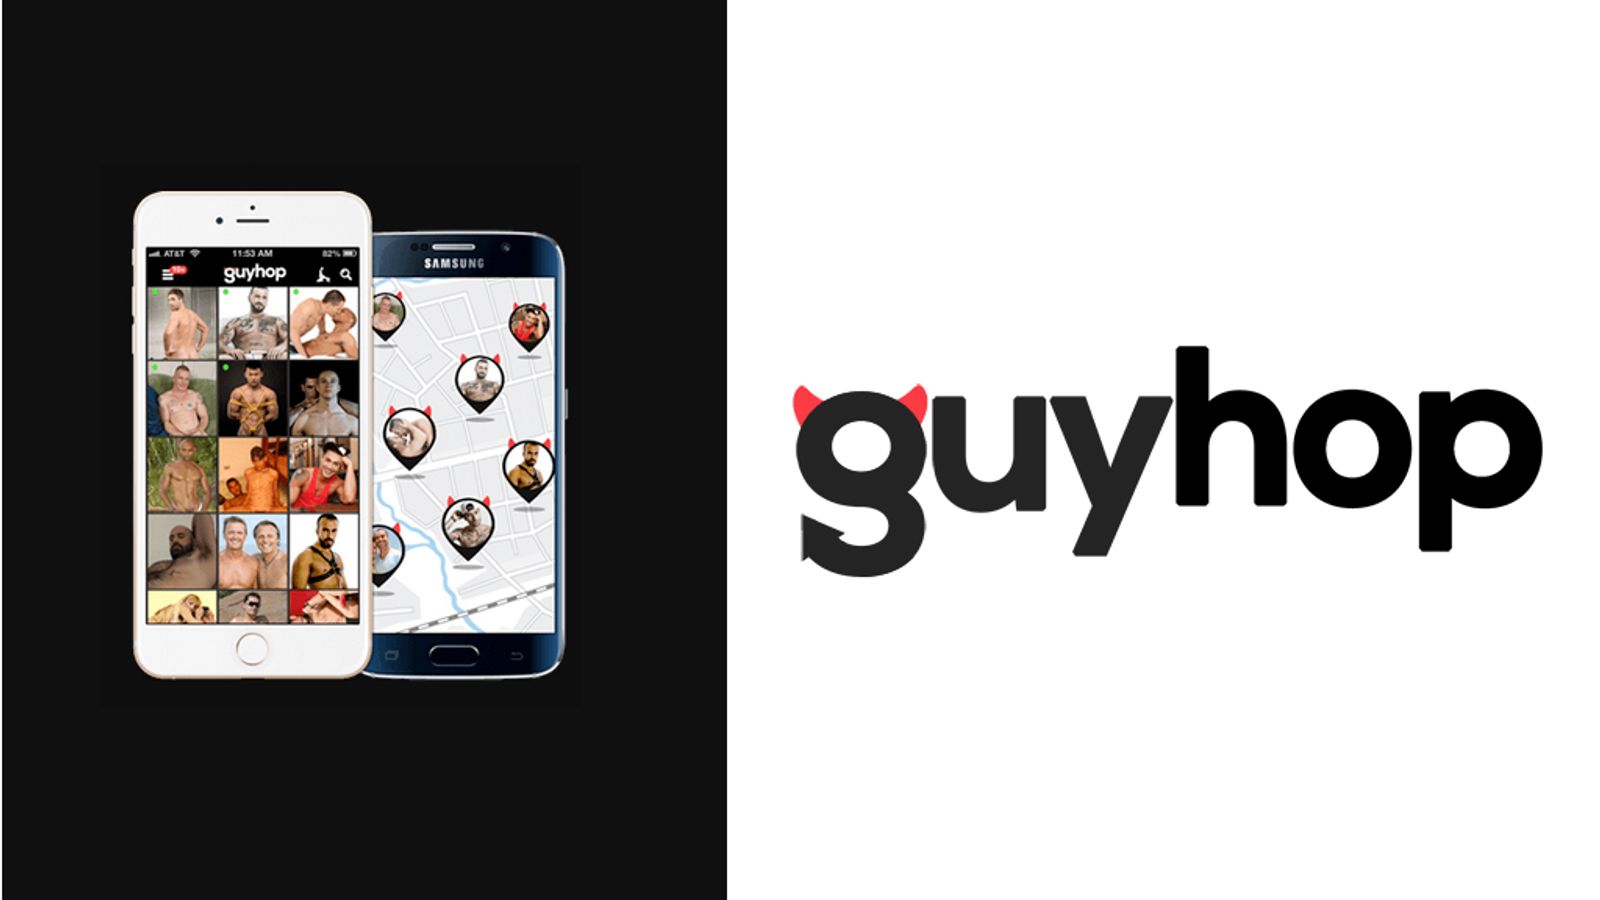 Guyhop Hits 100,000 Members as Personal Ad Use Declines